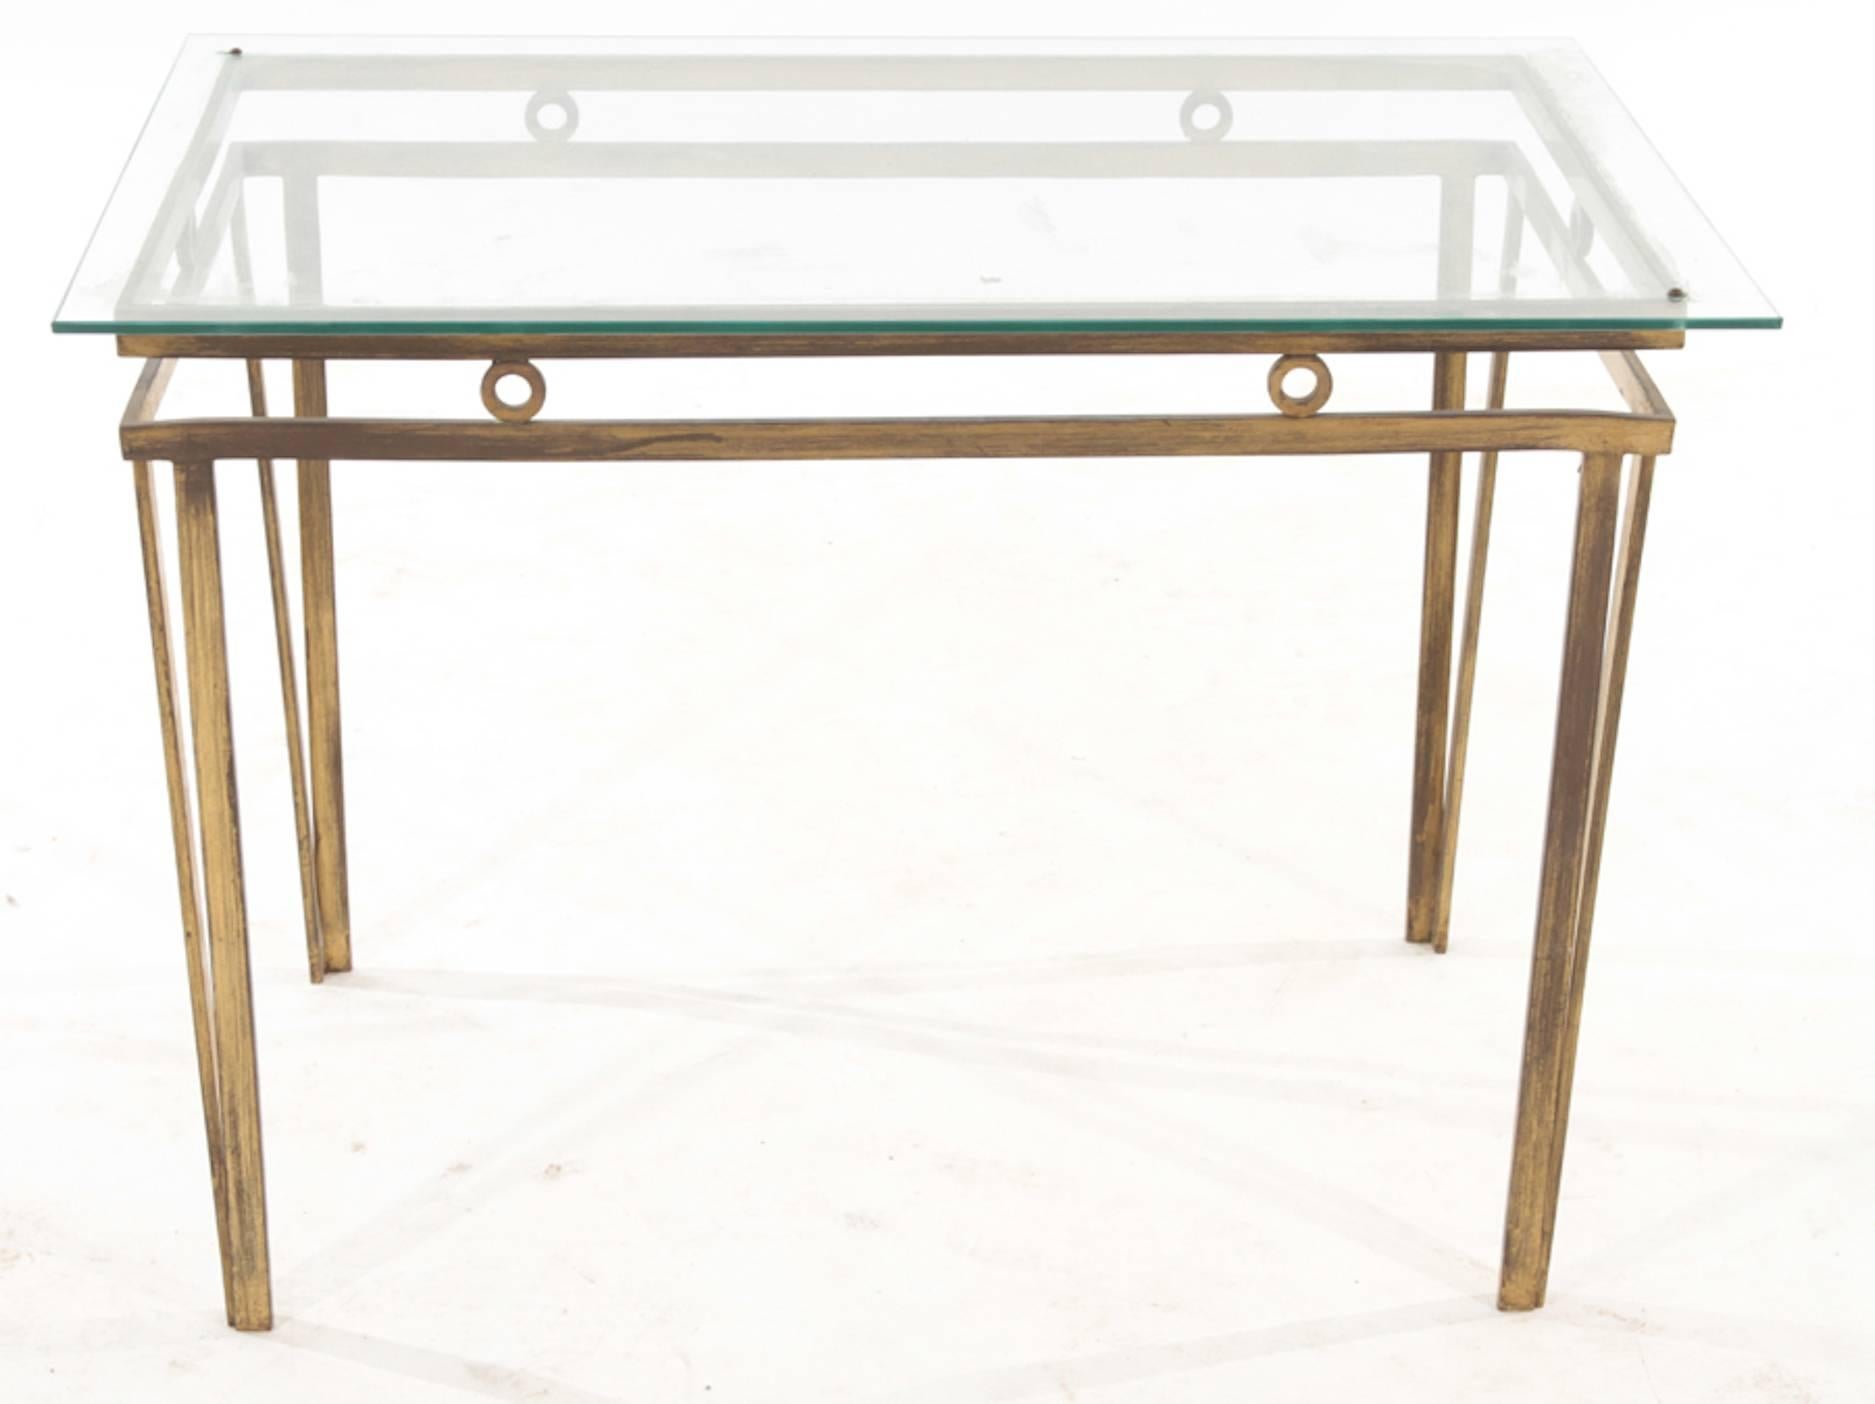 French gilt bronze cocktail table with glass top, mid-20th century.